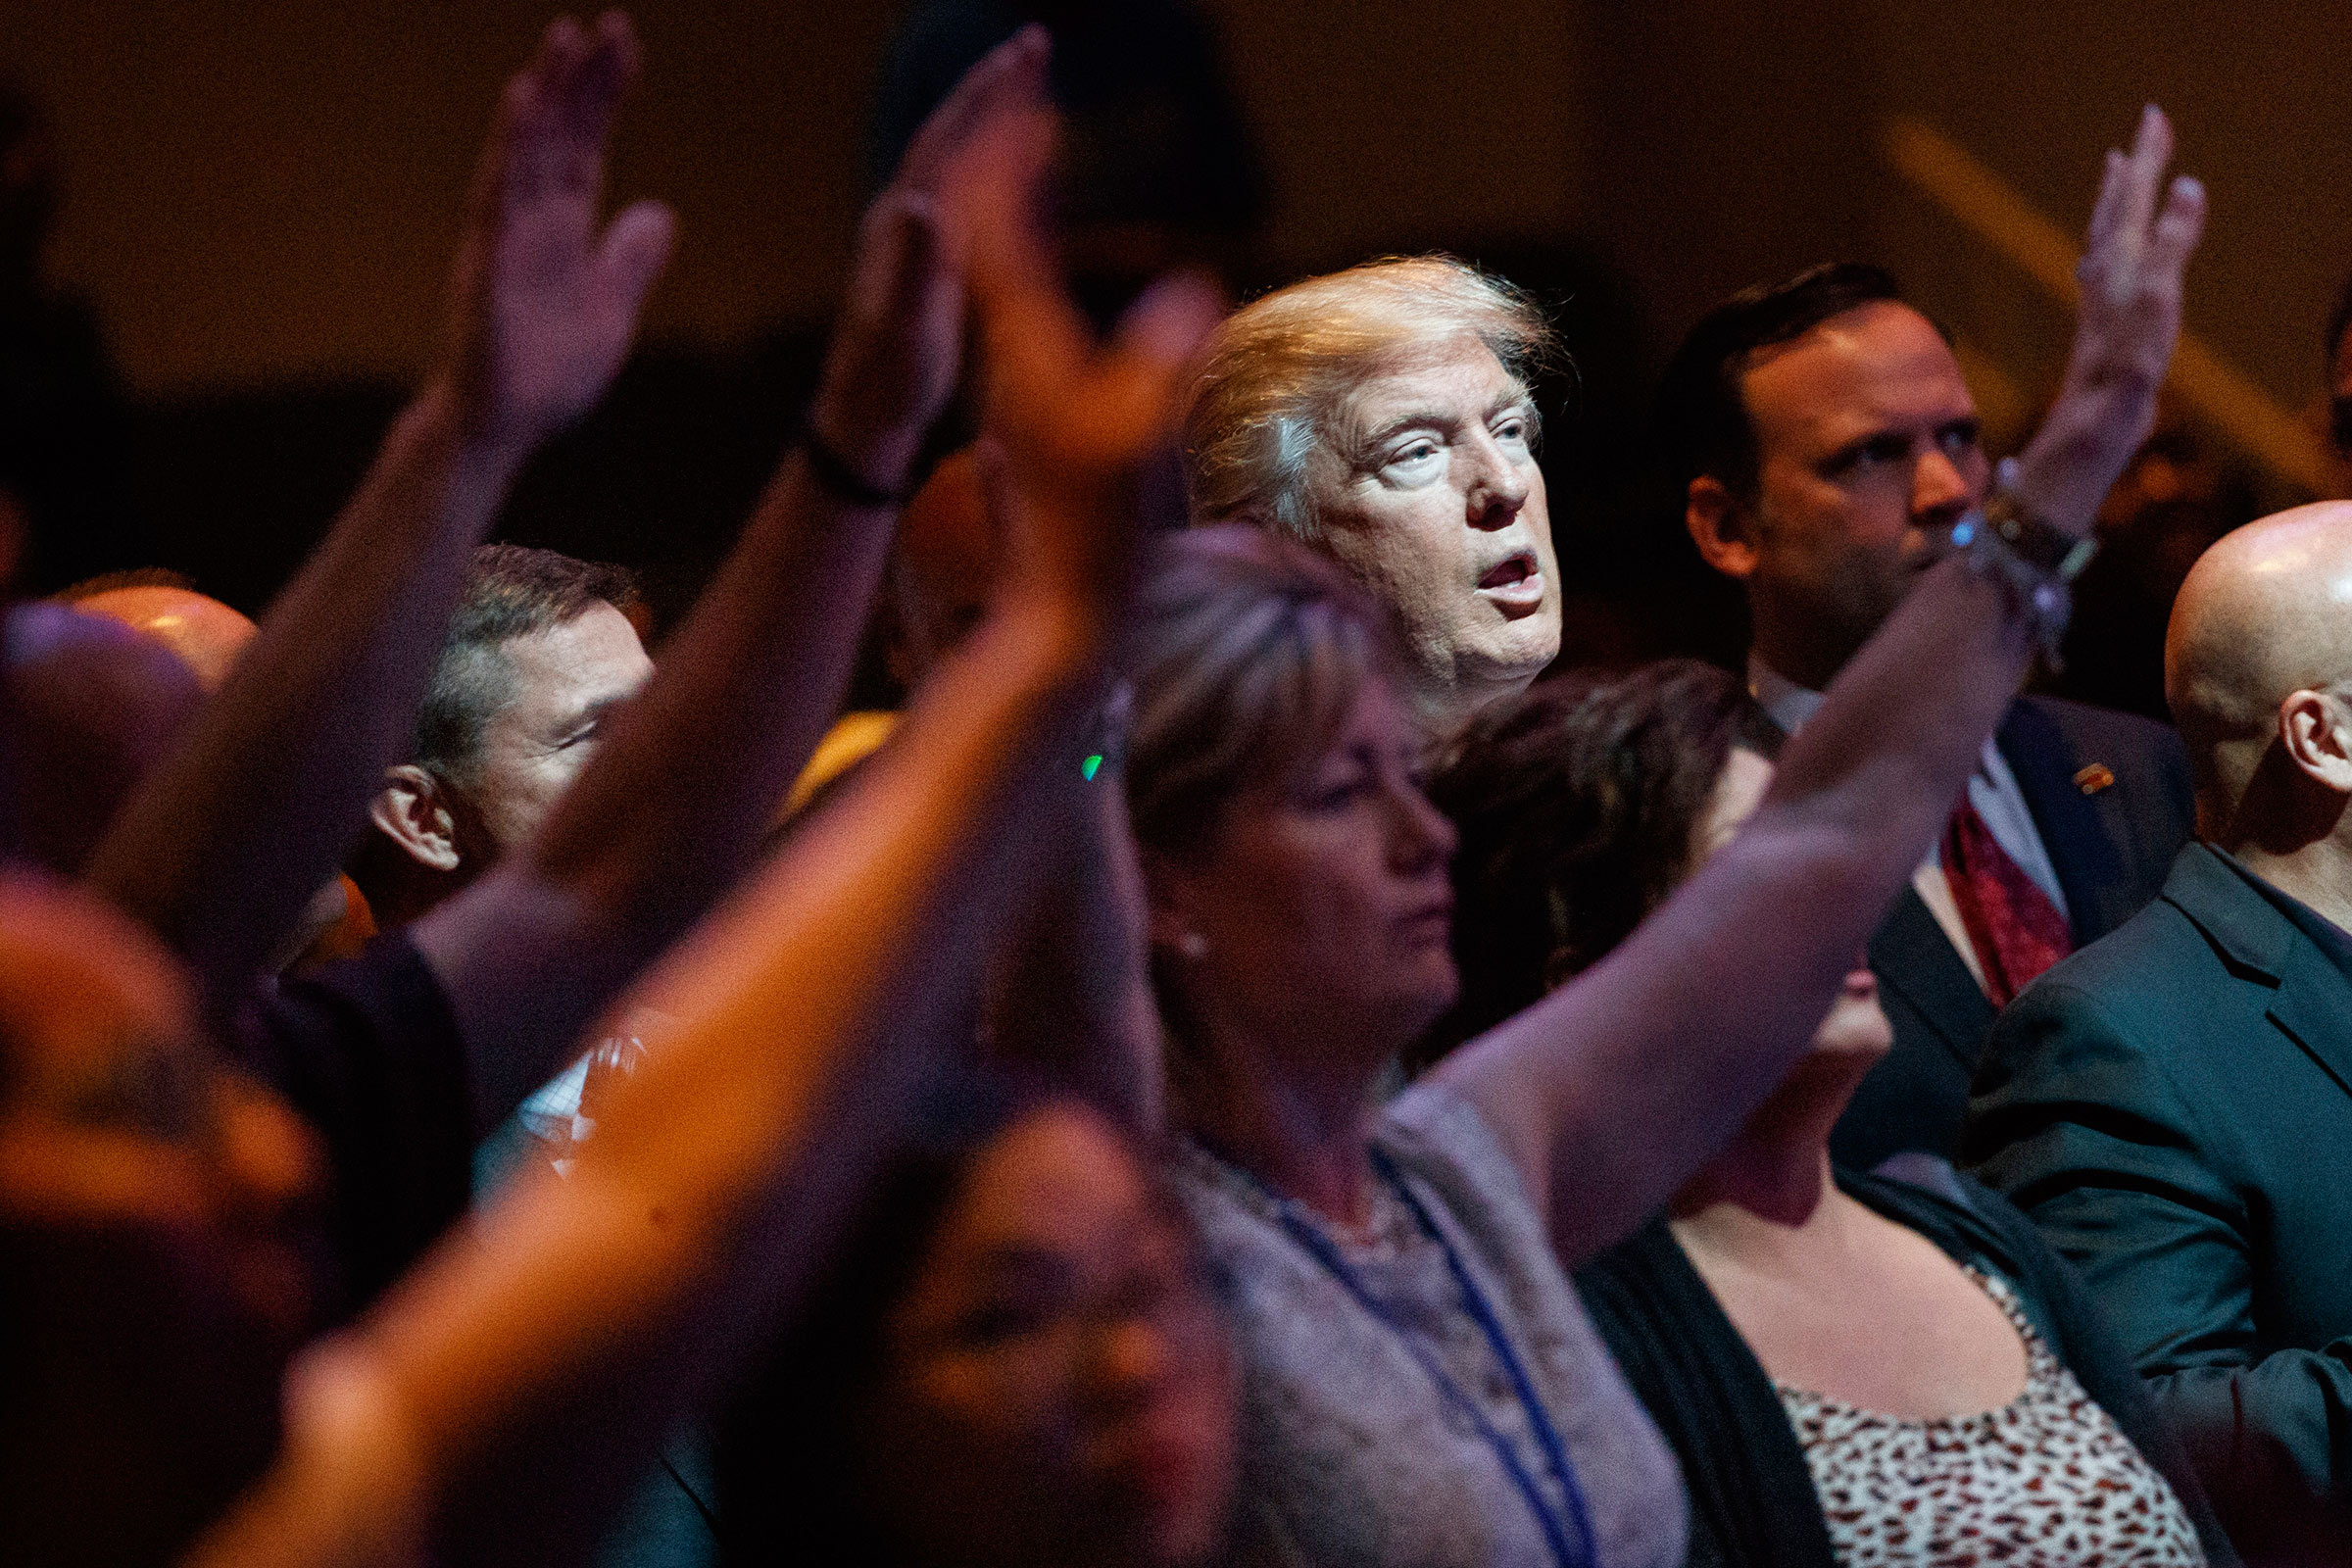 Then-candidate Trump at a 2016 service at the International Church of Las Vegas. (Evan Vucci—AP)